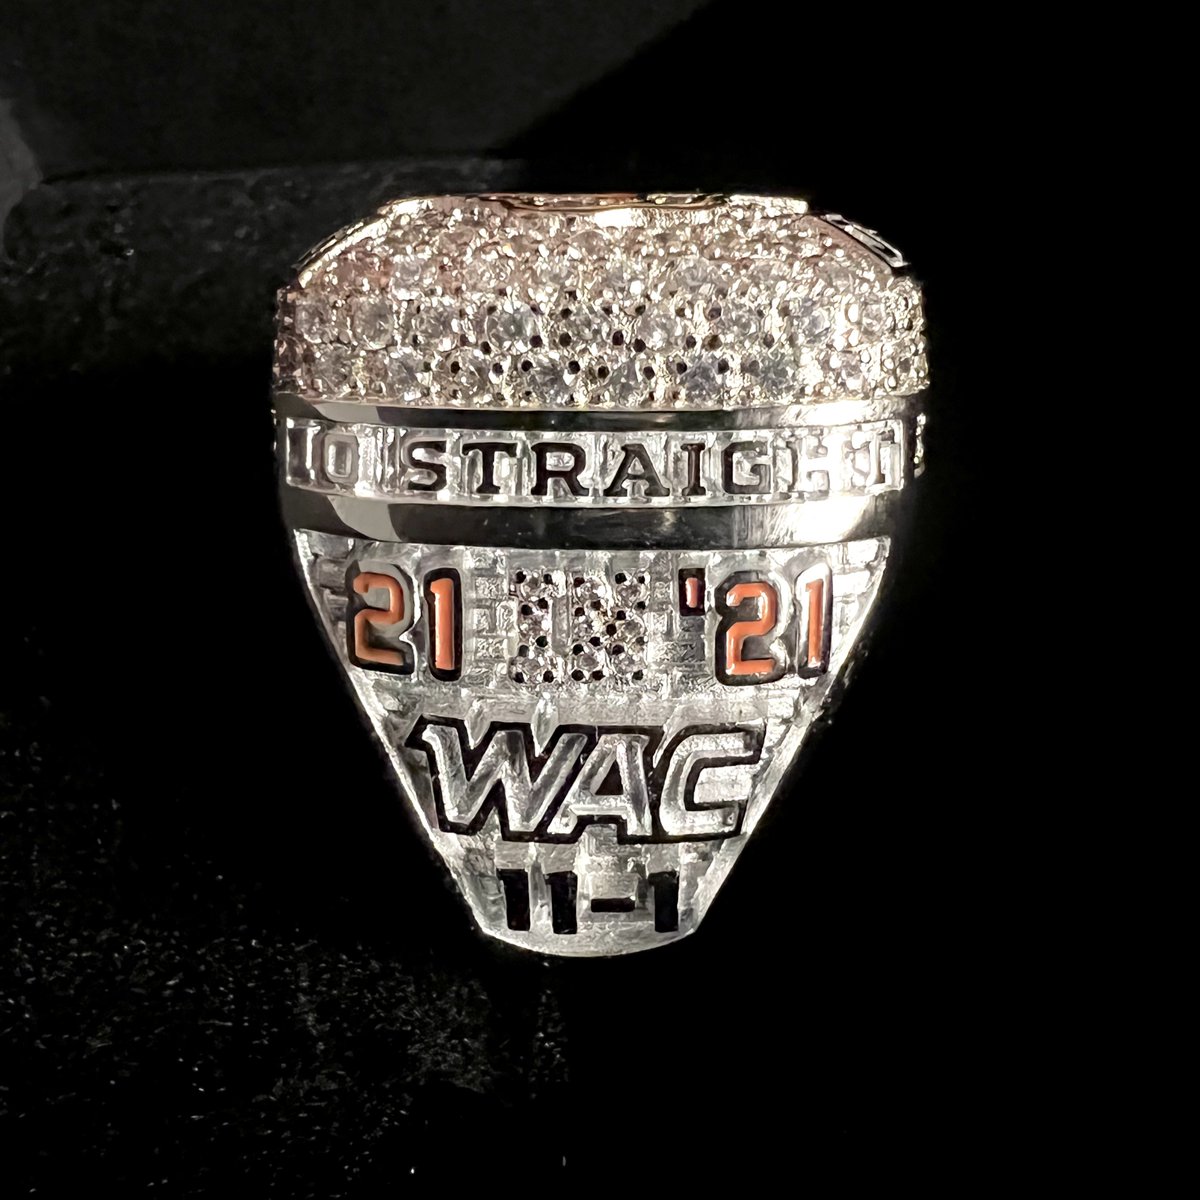 Woke up today a little heavy handed! 💍 Members of the 2021 WAC Champs received their “21 in ‘21” rings last night at the Kat Klub during our team social. These rings commemorate the most wins in a calendar year in college football history. #EatEmUpKats